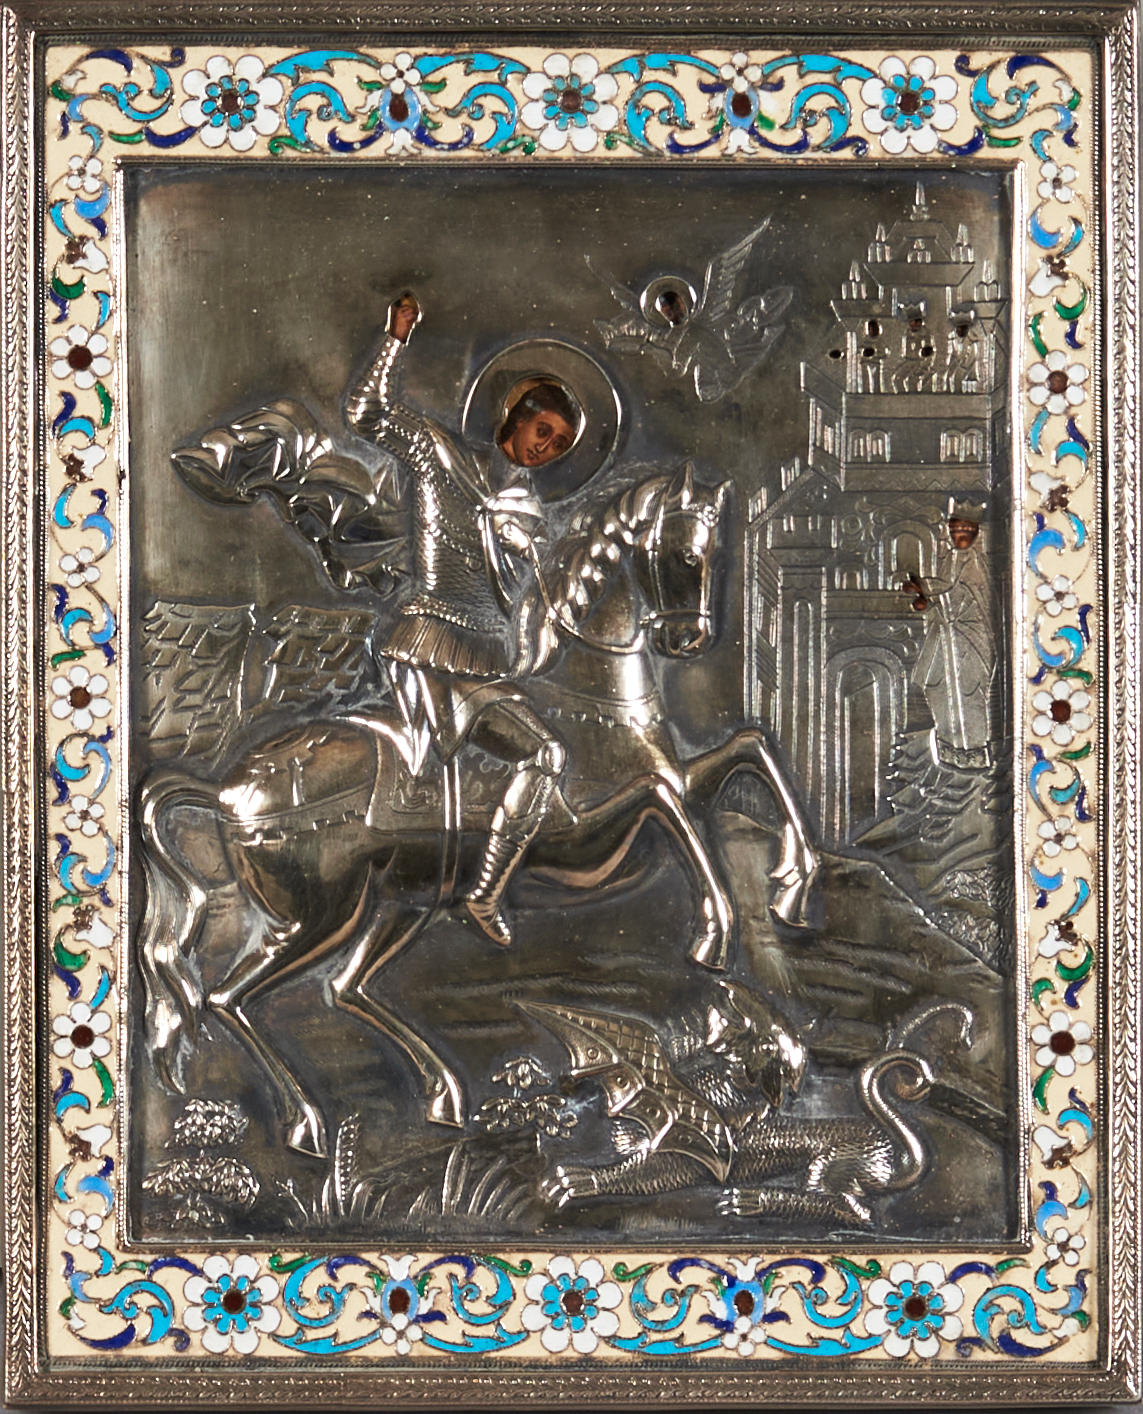 RUSSIAN ICON OF ST. GEORGE SLAYING